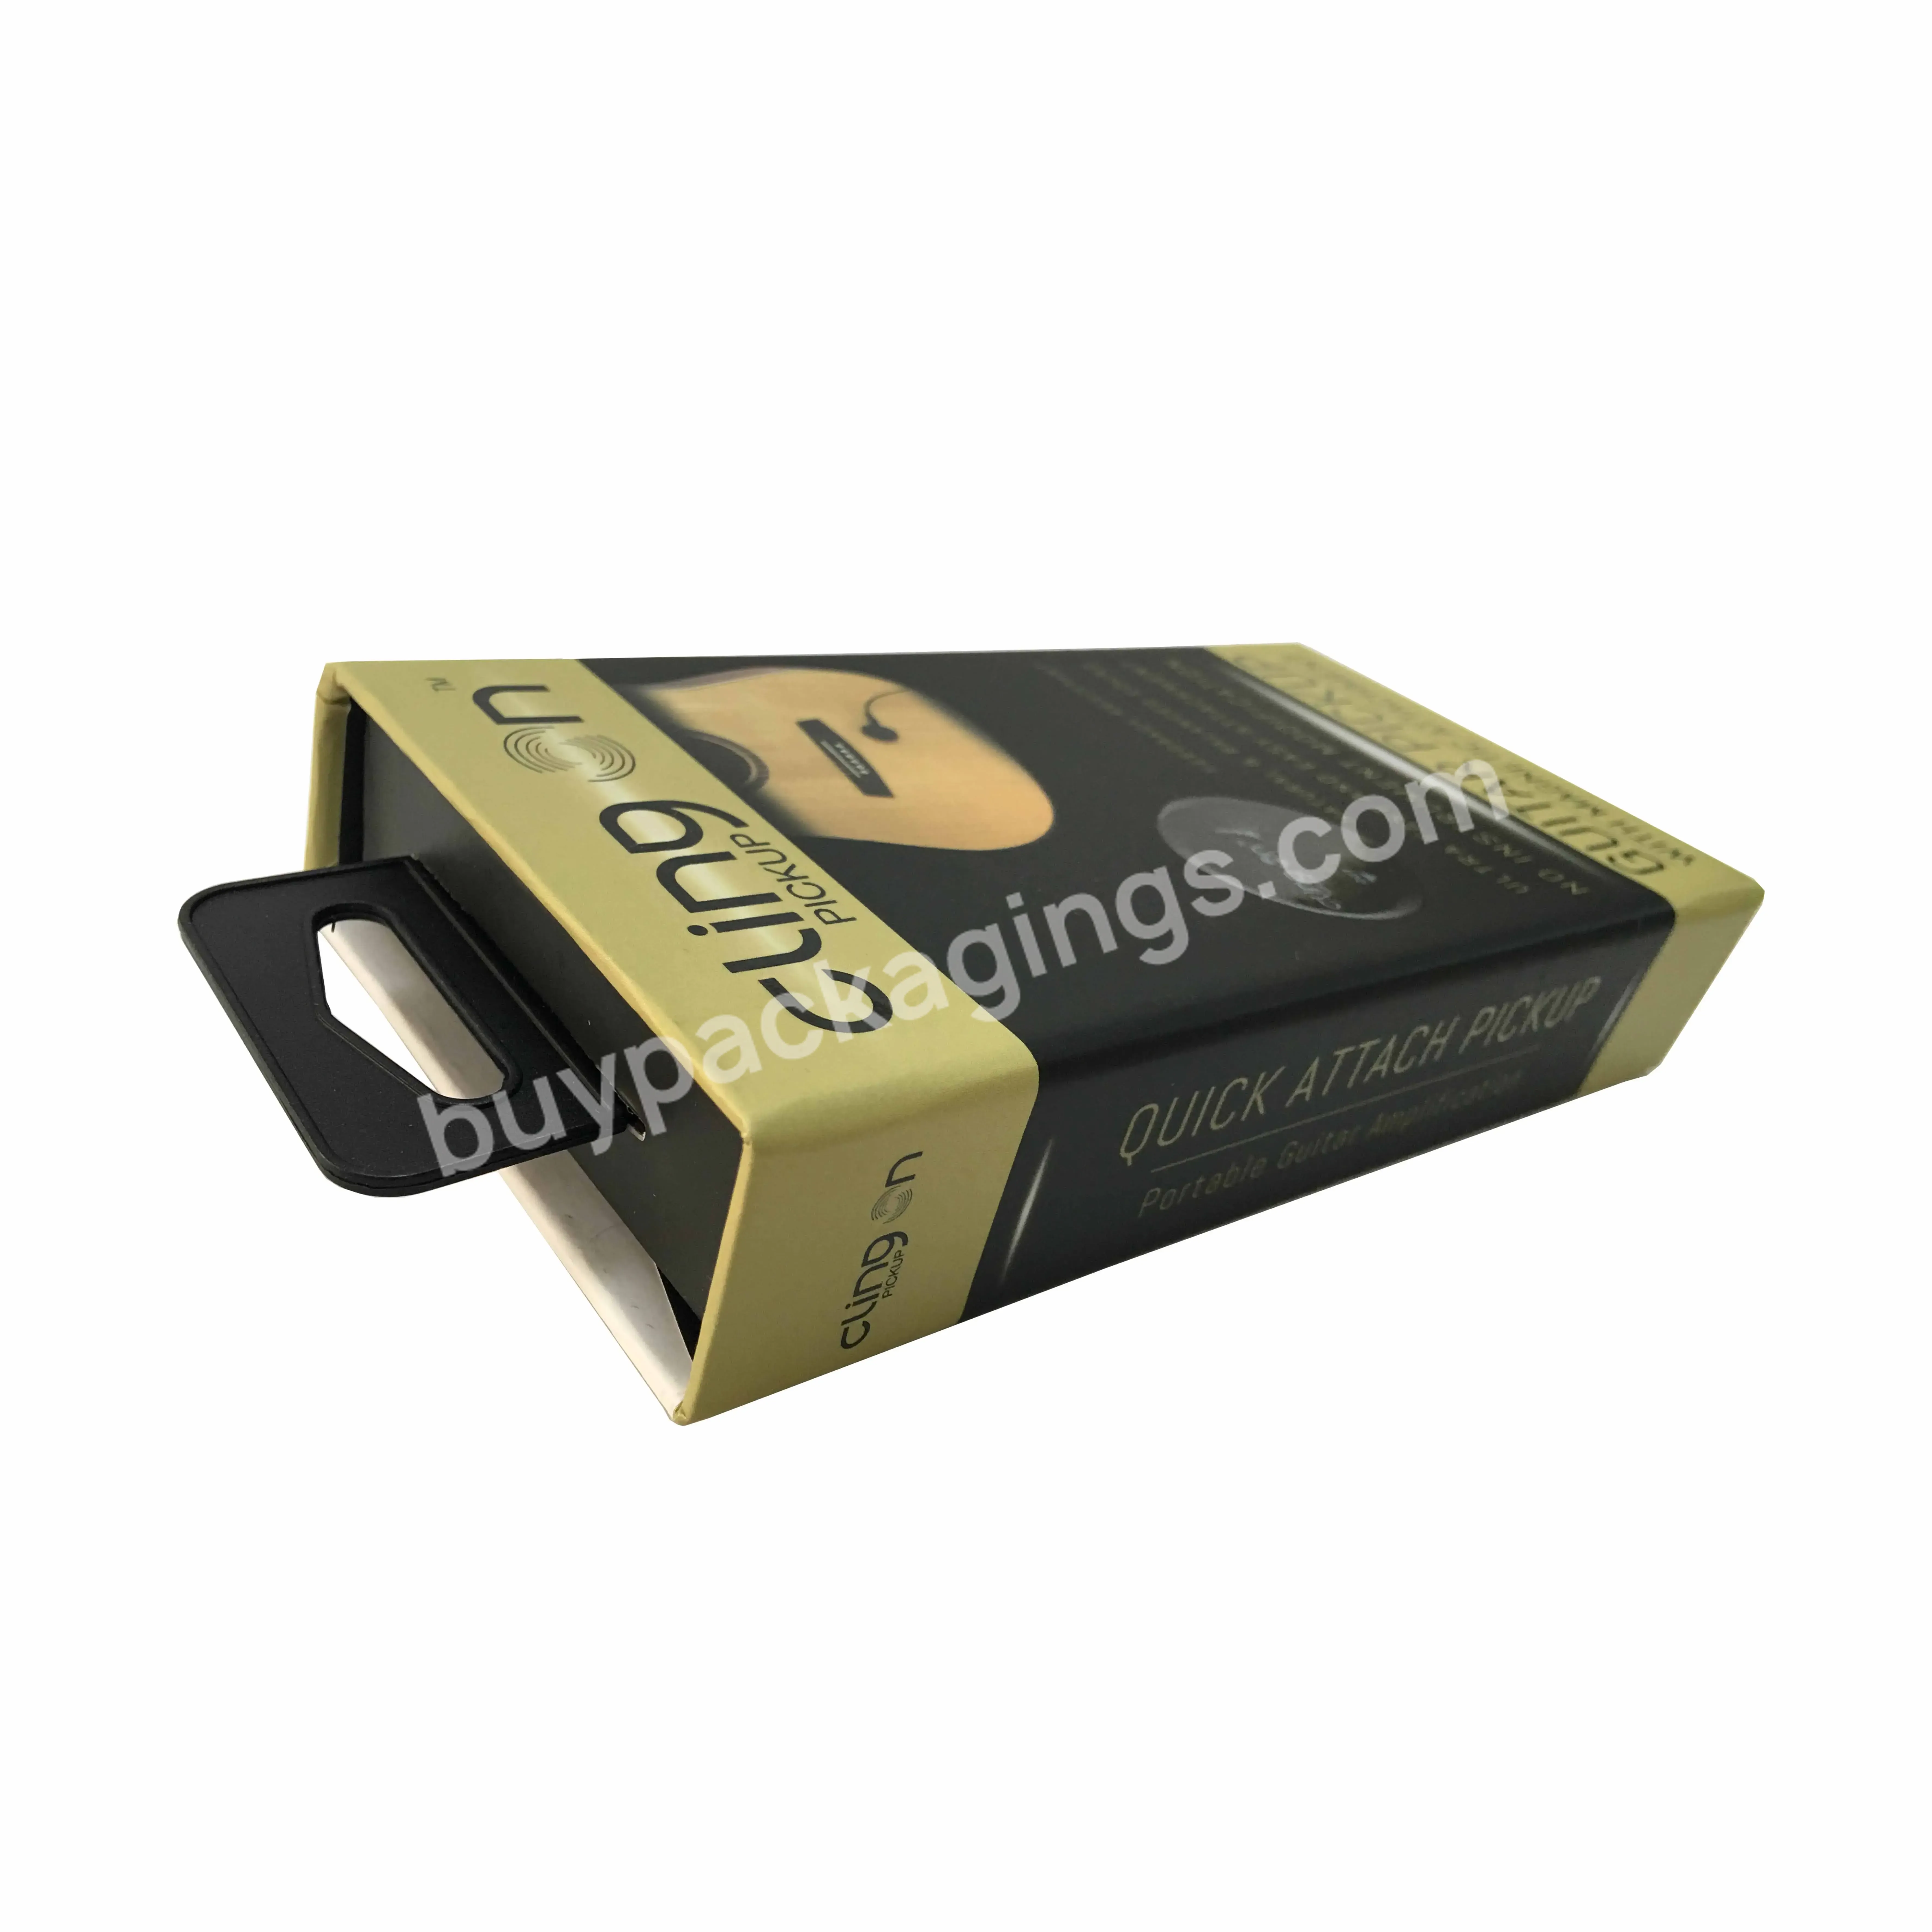 Cute Design Rigid Box Packaging With Strong Quality - Buy Rigid Box Packaging,Cute Design Rigid Box Packaging,Rigid Box Packaging With Strong Quality.